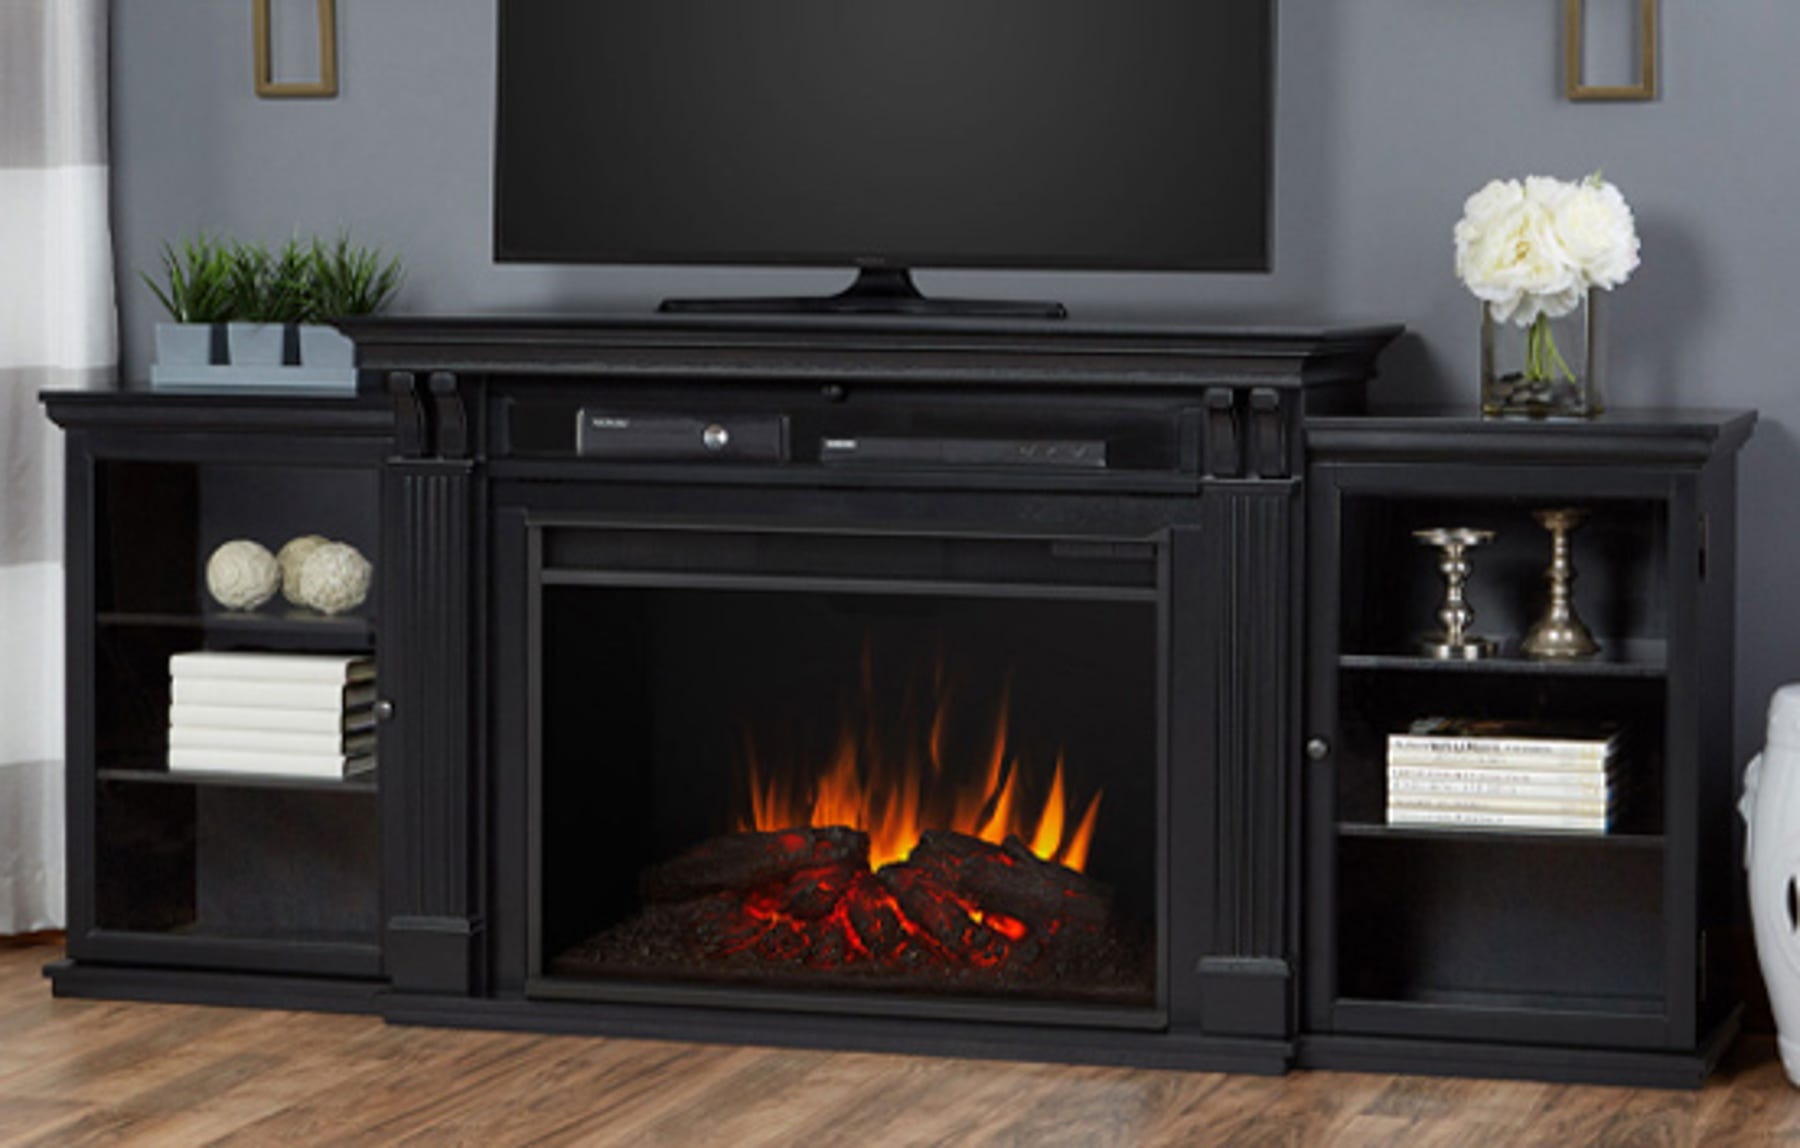 Tv Stands Corner Fireplace, 60 Inch Corner Tv Stand With Fireplace